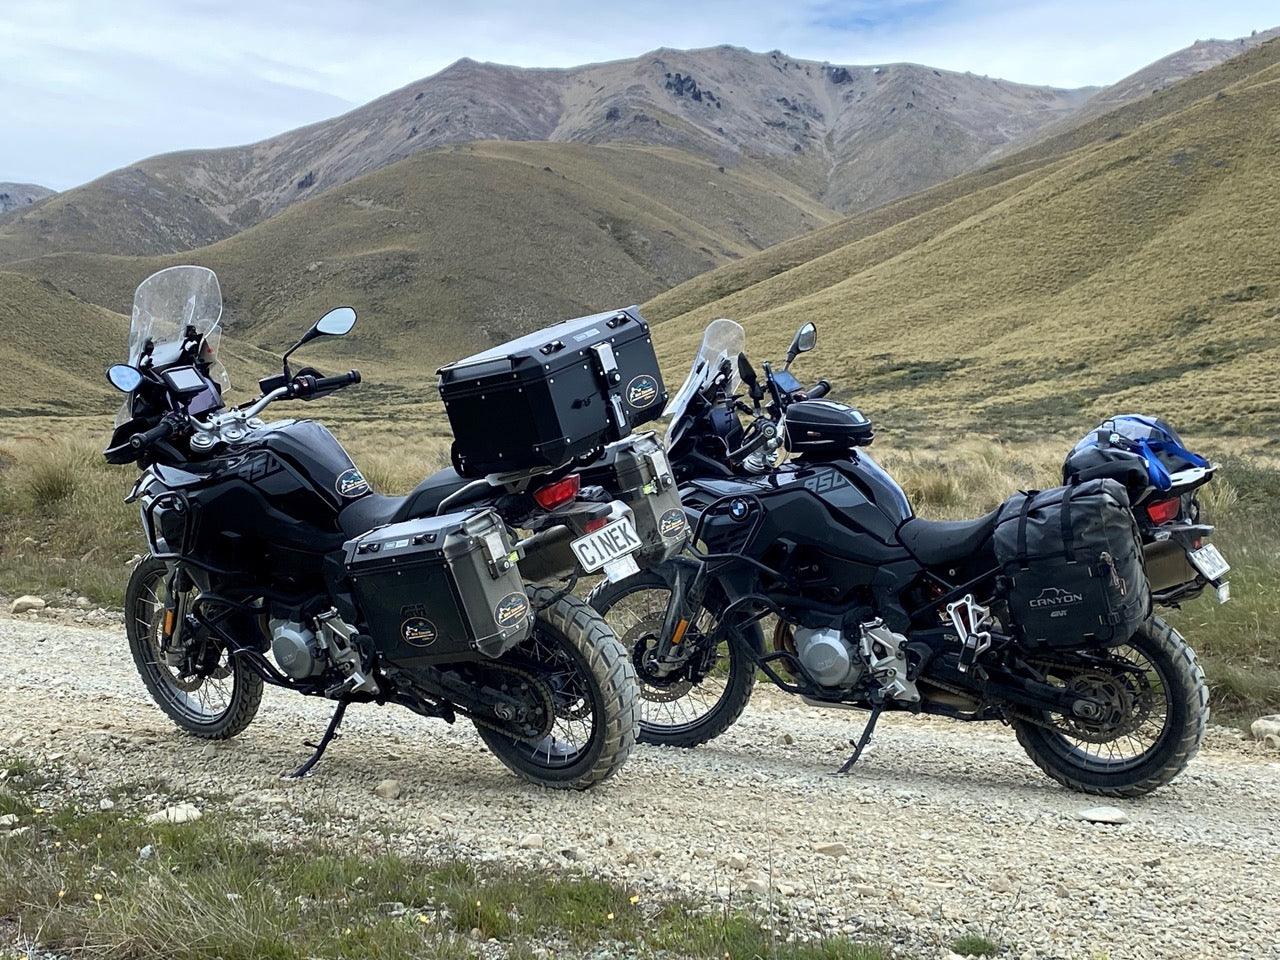 Two BMW motorcycles with luggage parked on a gravel road against a mountainous backdrop